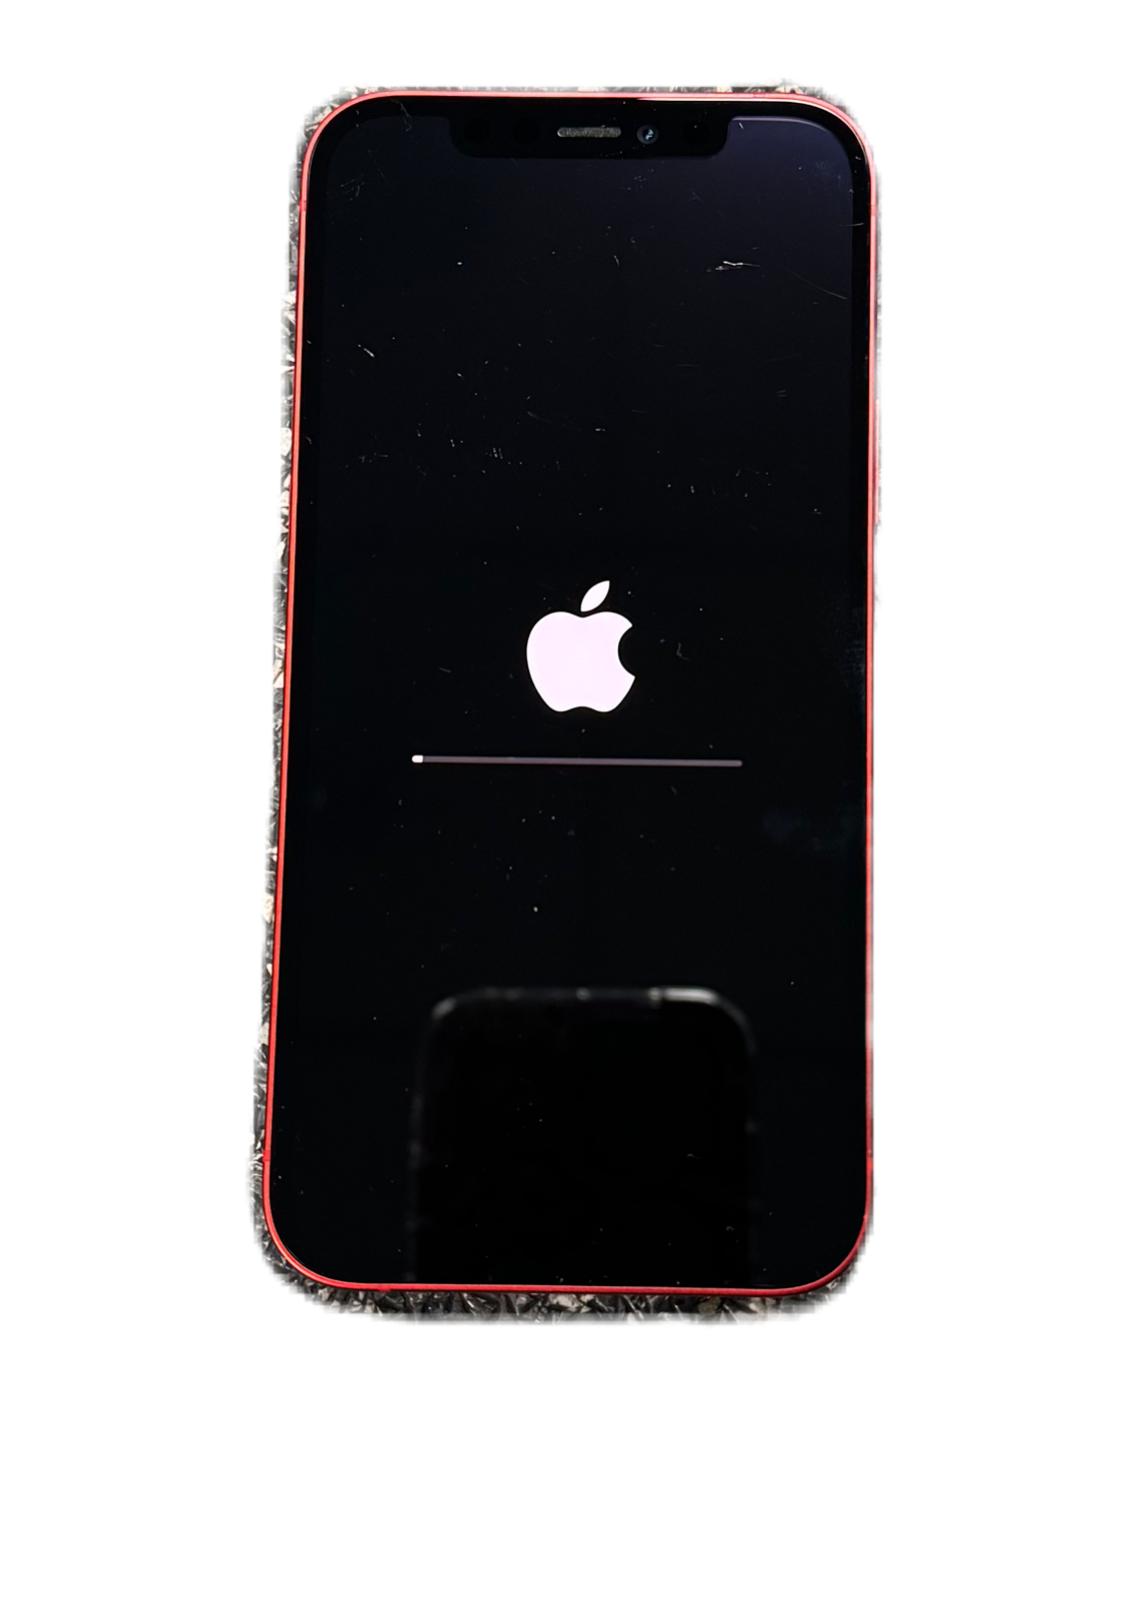 Apple iPhone 12 - 64GB - Unlocked - Product Red - 82% Battery